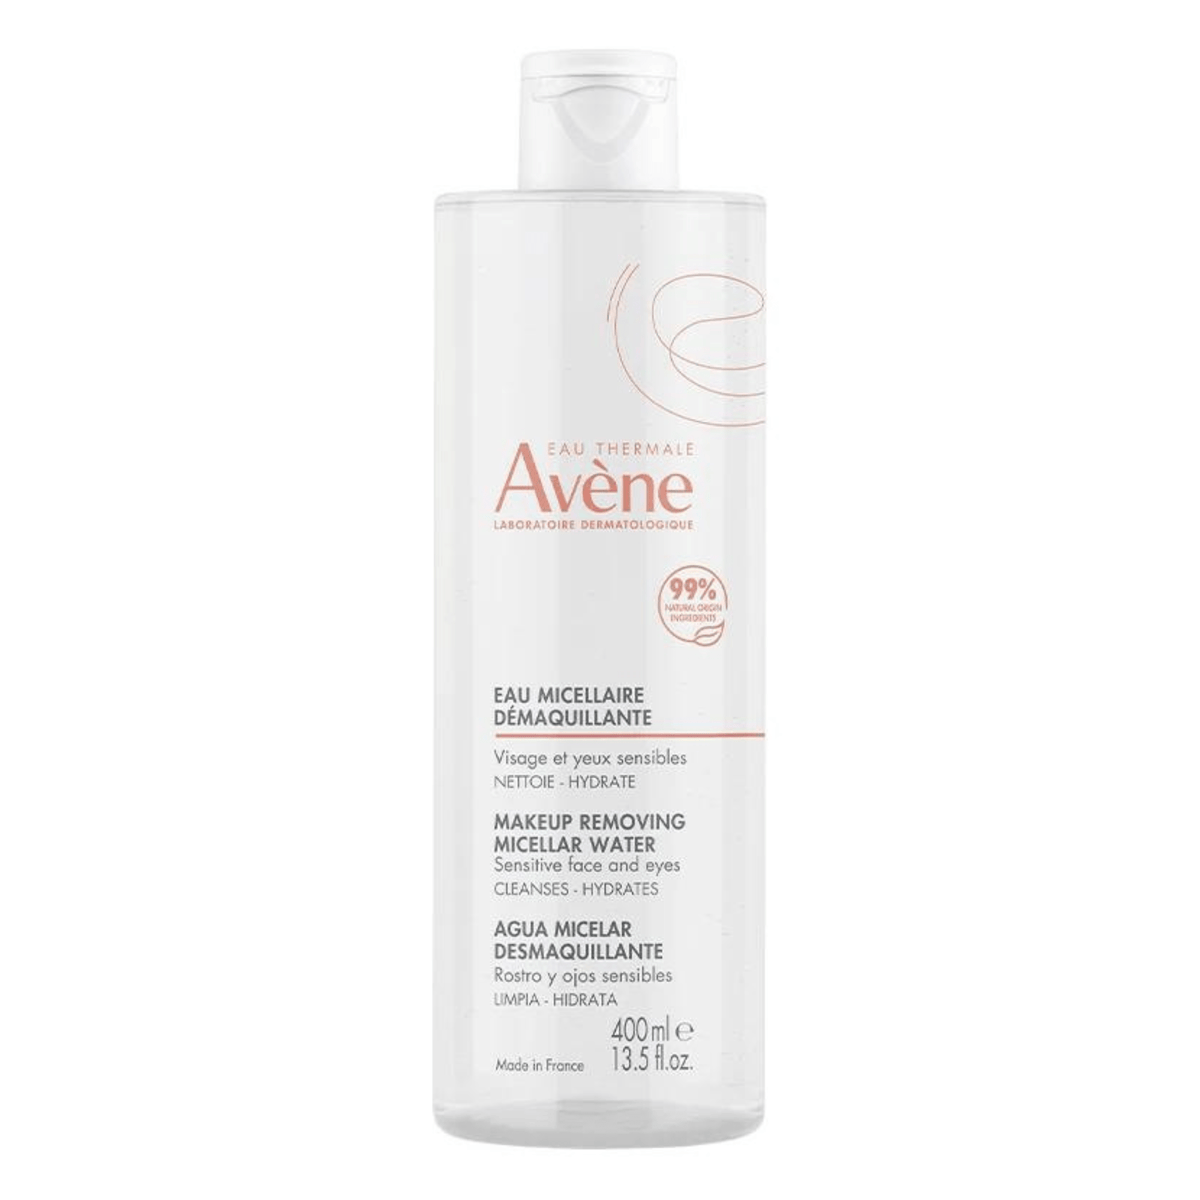 Primary Image of Micellar Water